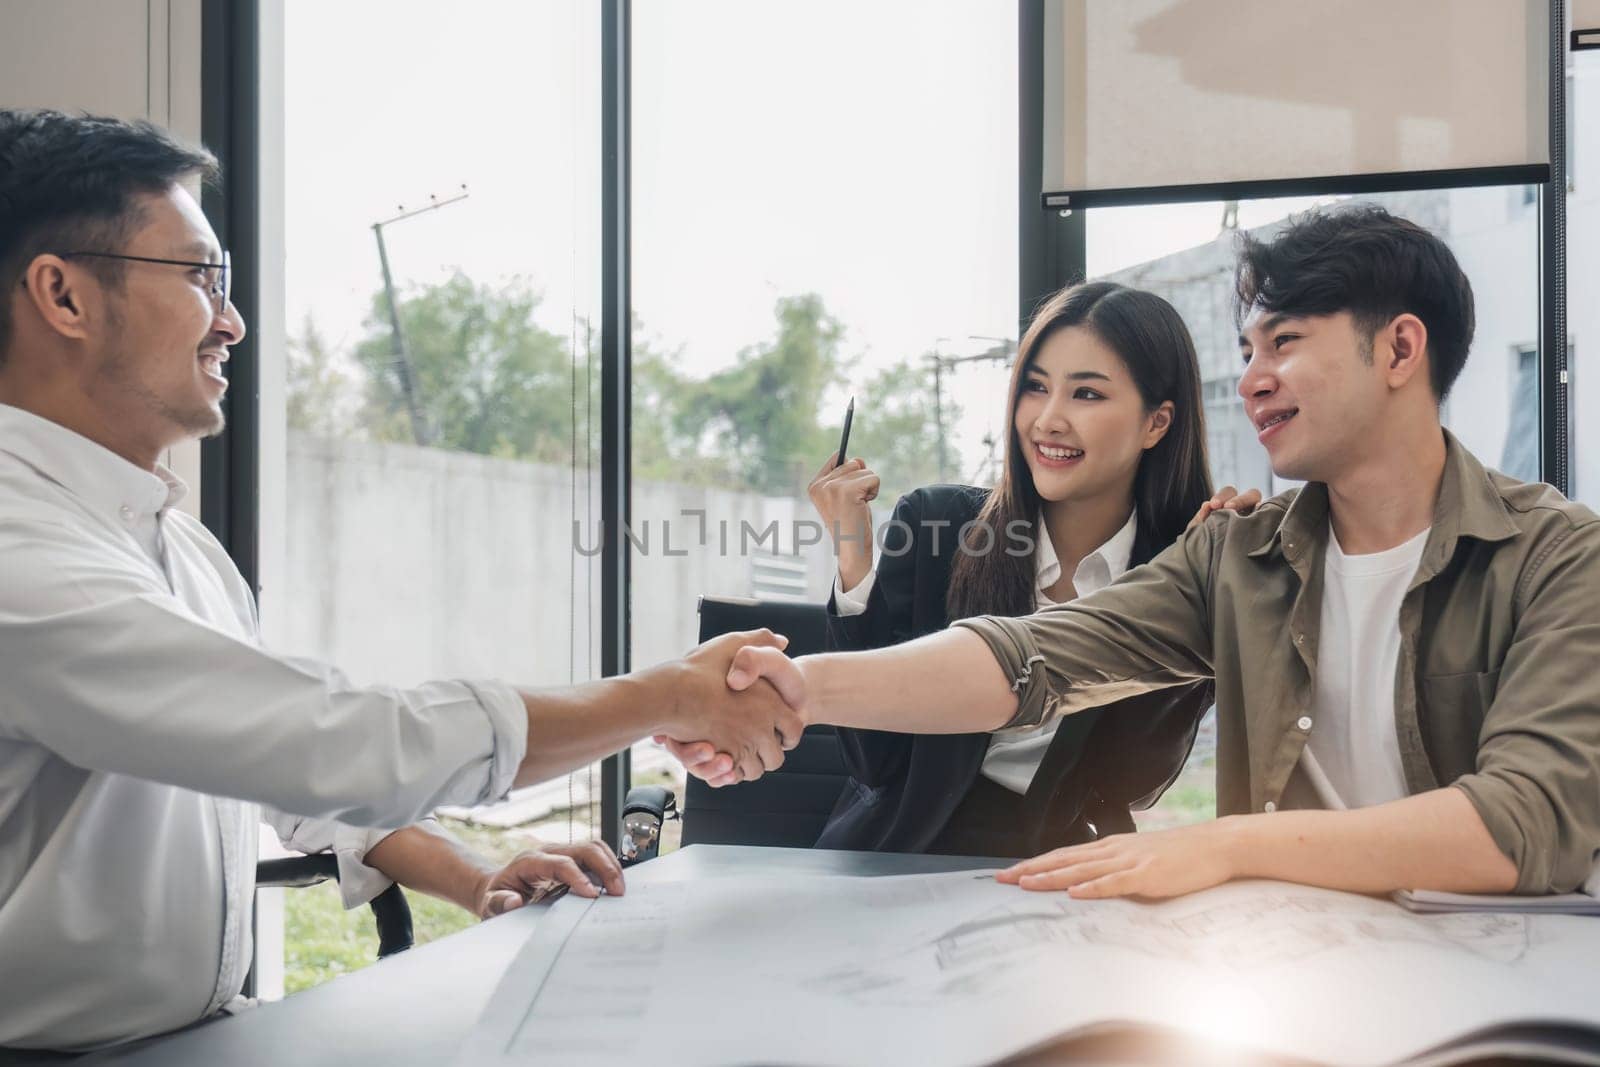 Success deal, Meeting and greeting for project of partner. Construction engineering, architect worker team or partnership hands shaking, handshake after agreement in office site, collaboration concept..